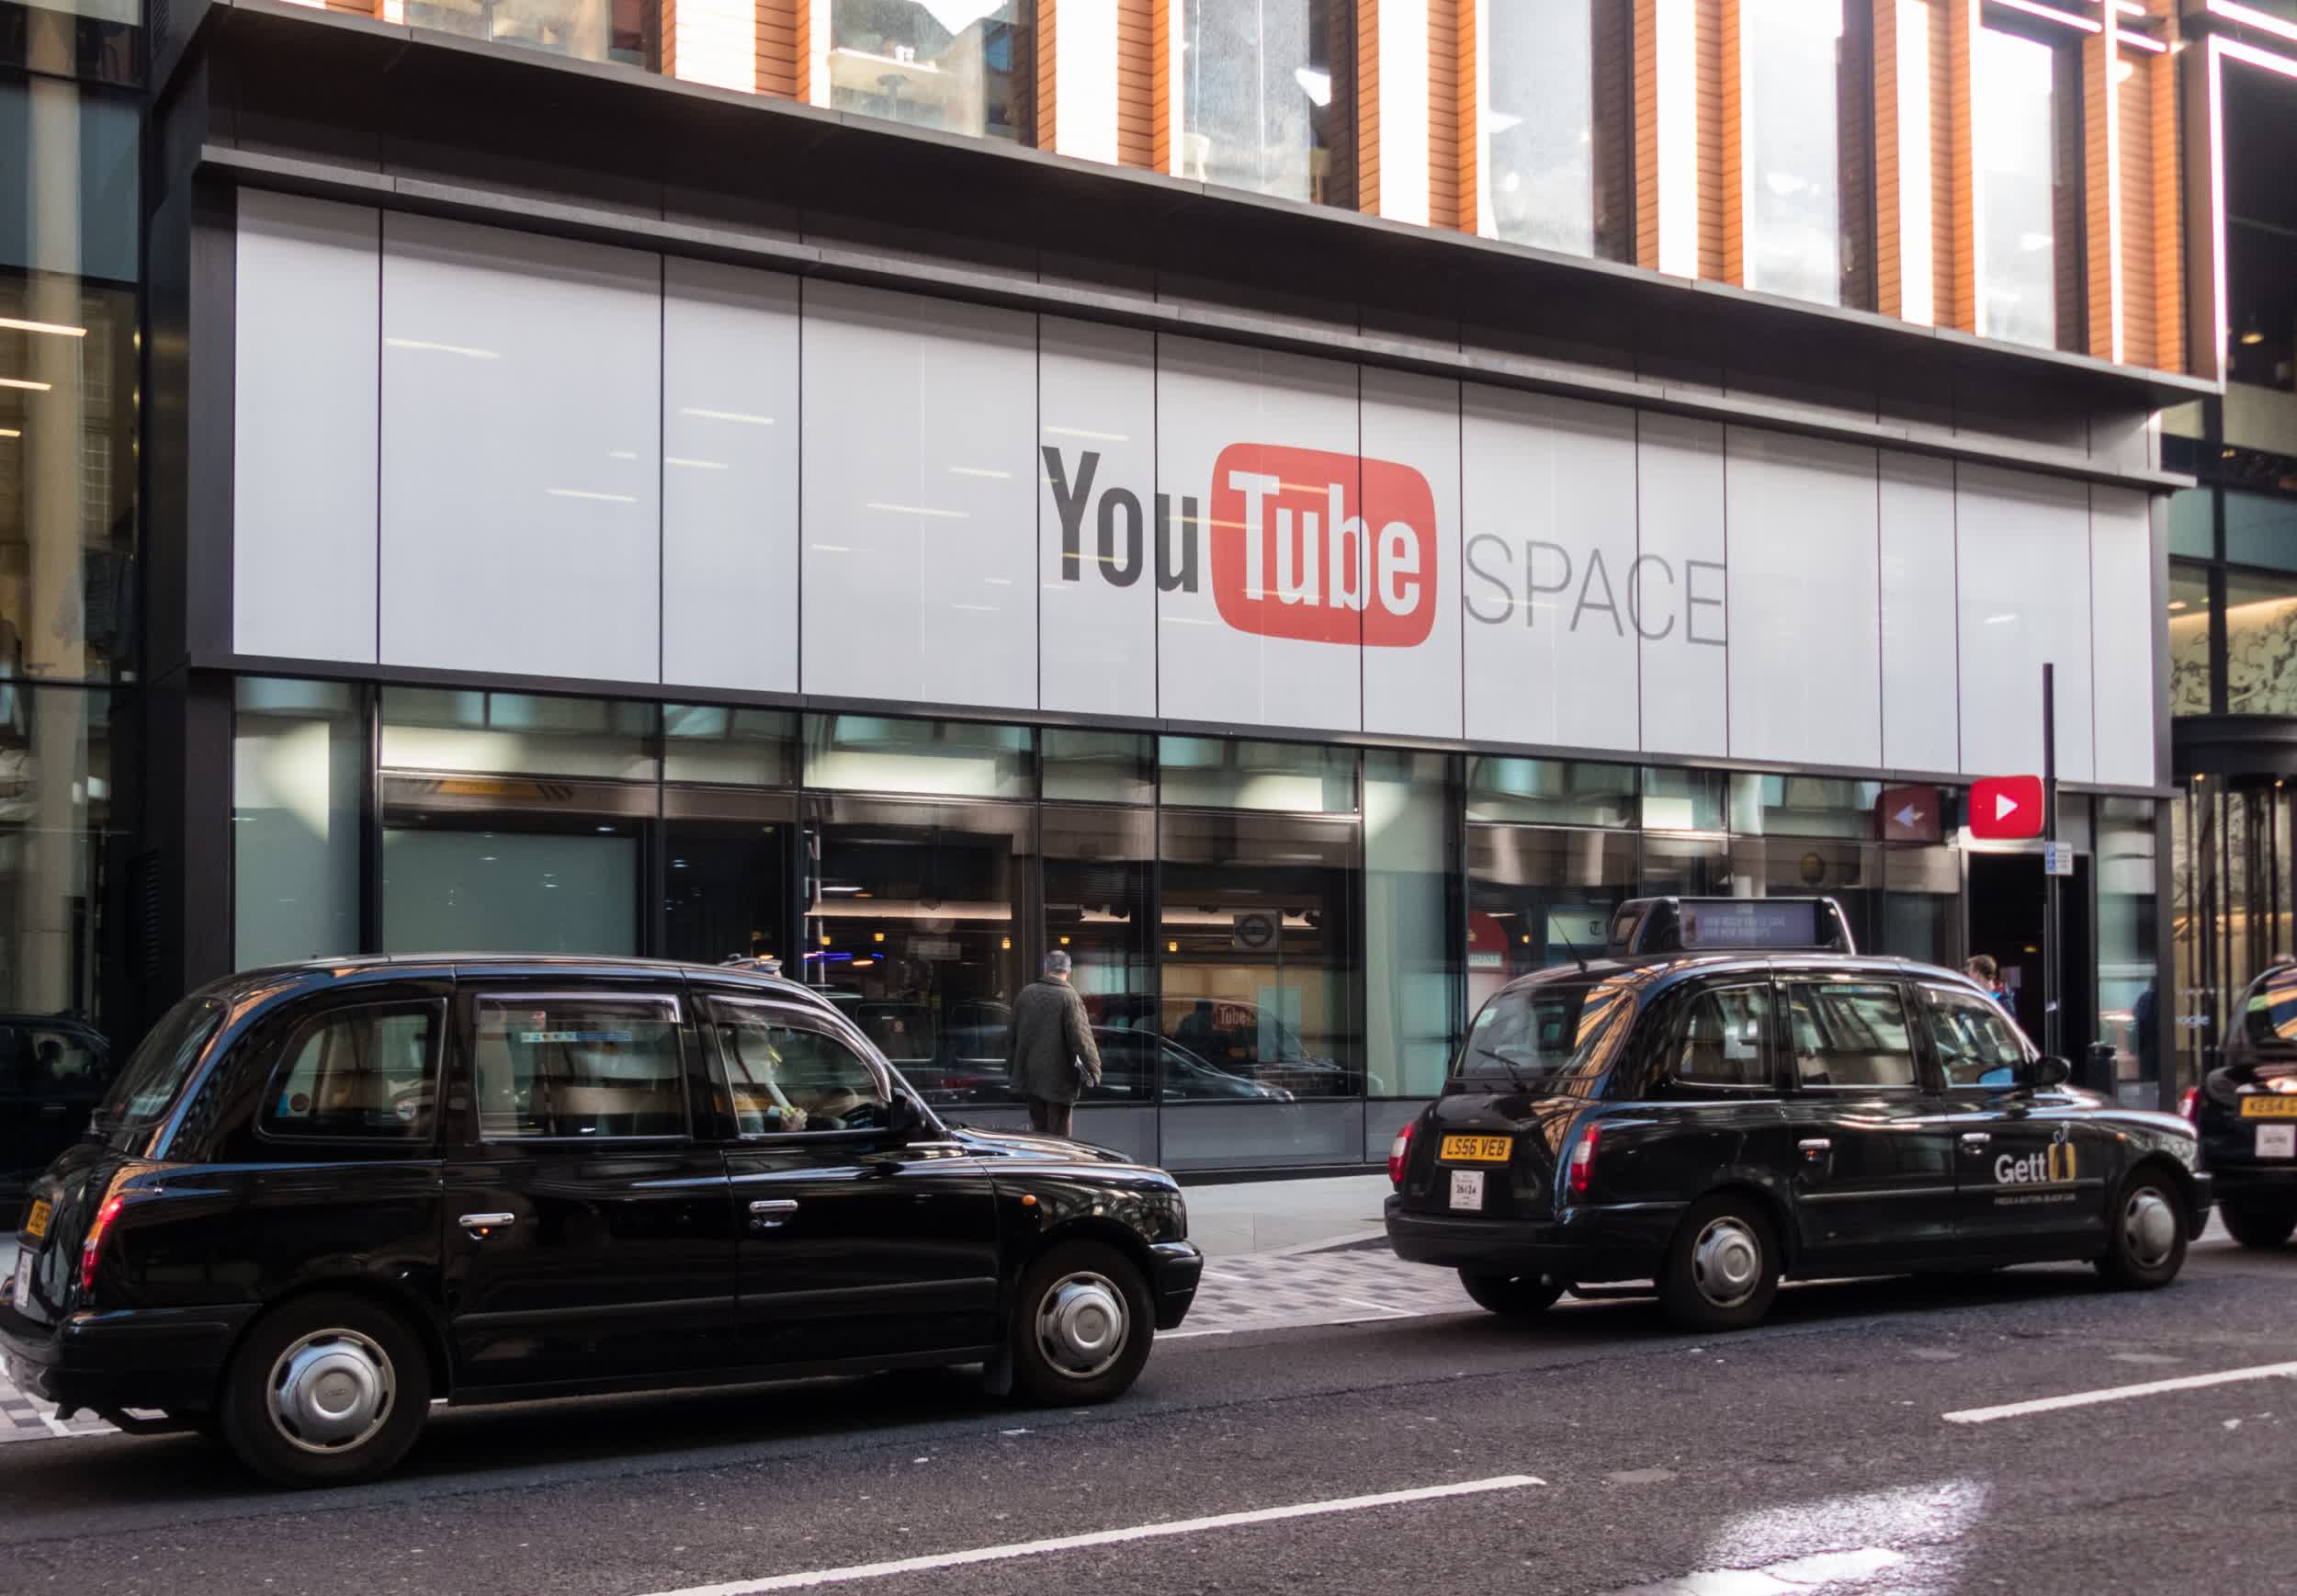 YouTube won't reopen creator Spaces in major markets after the pandemic